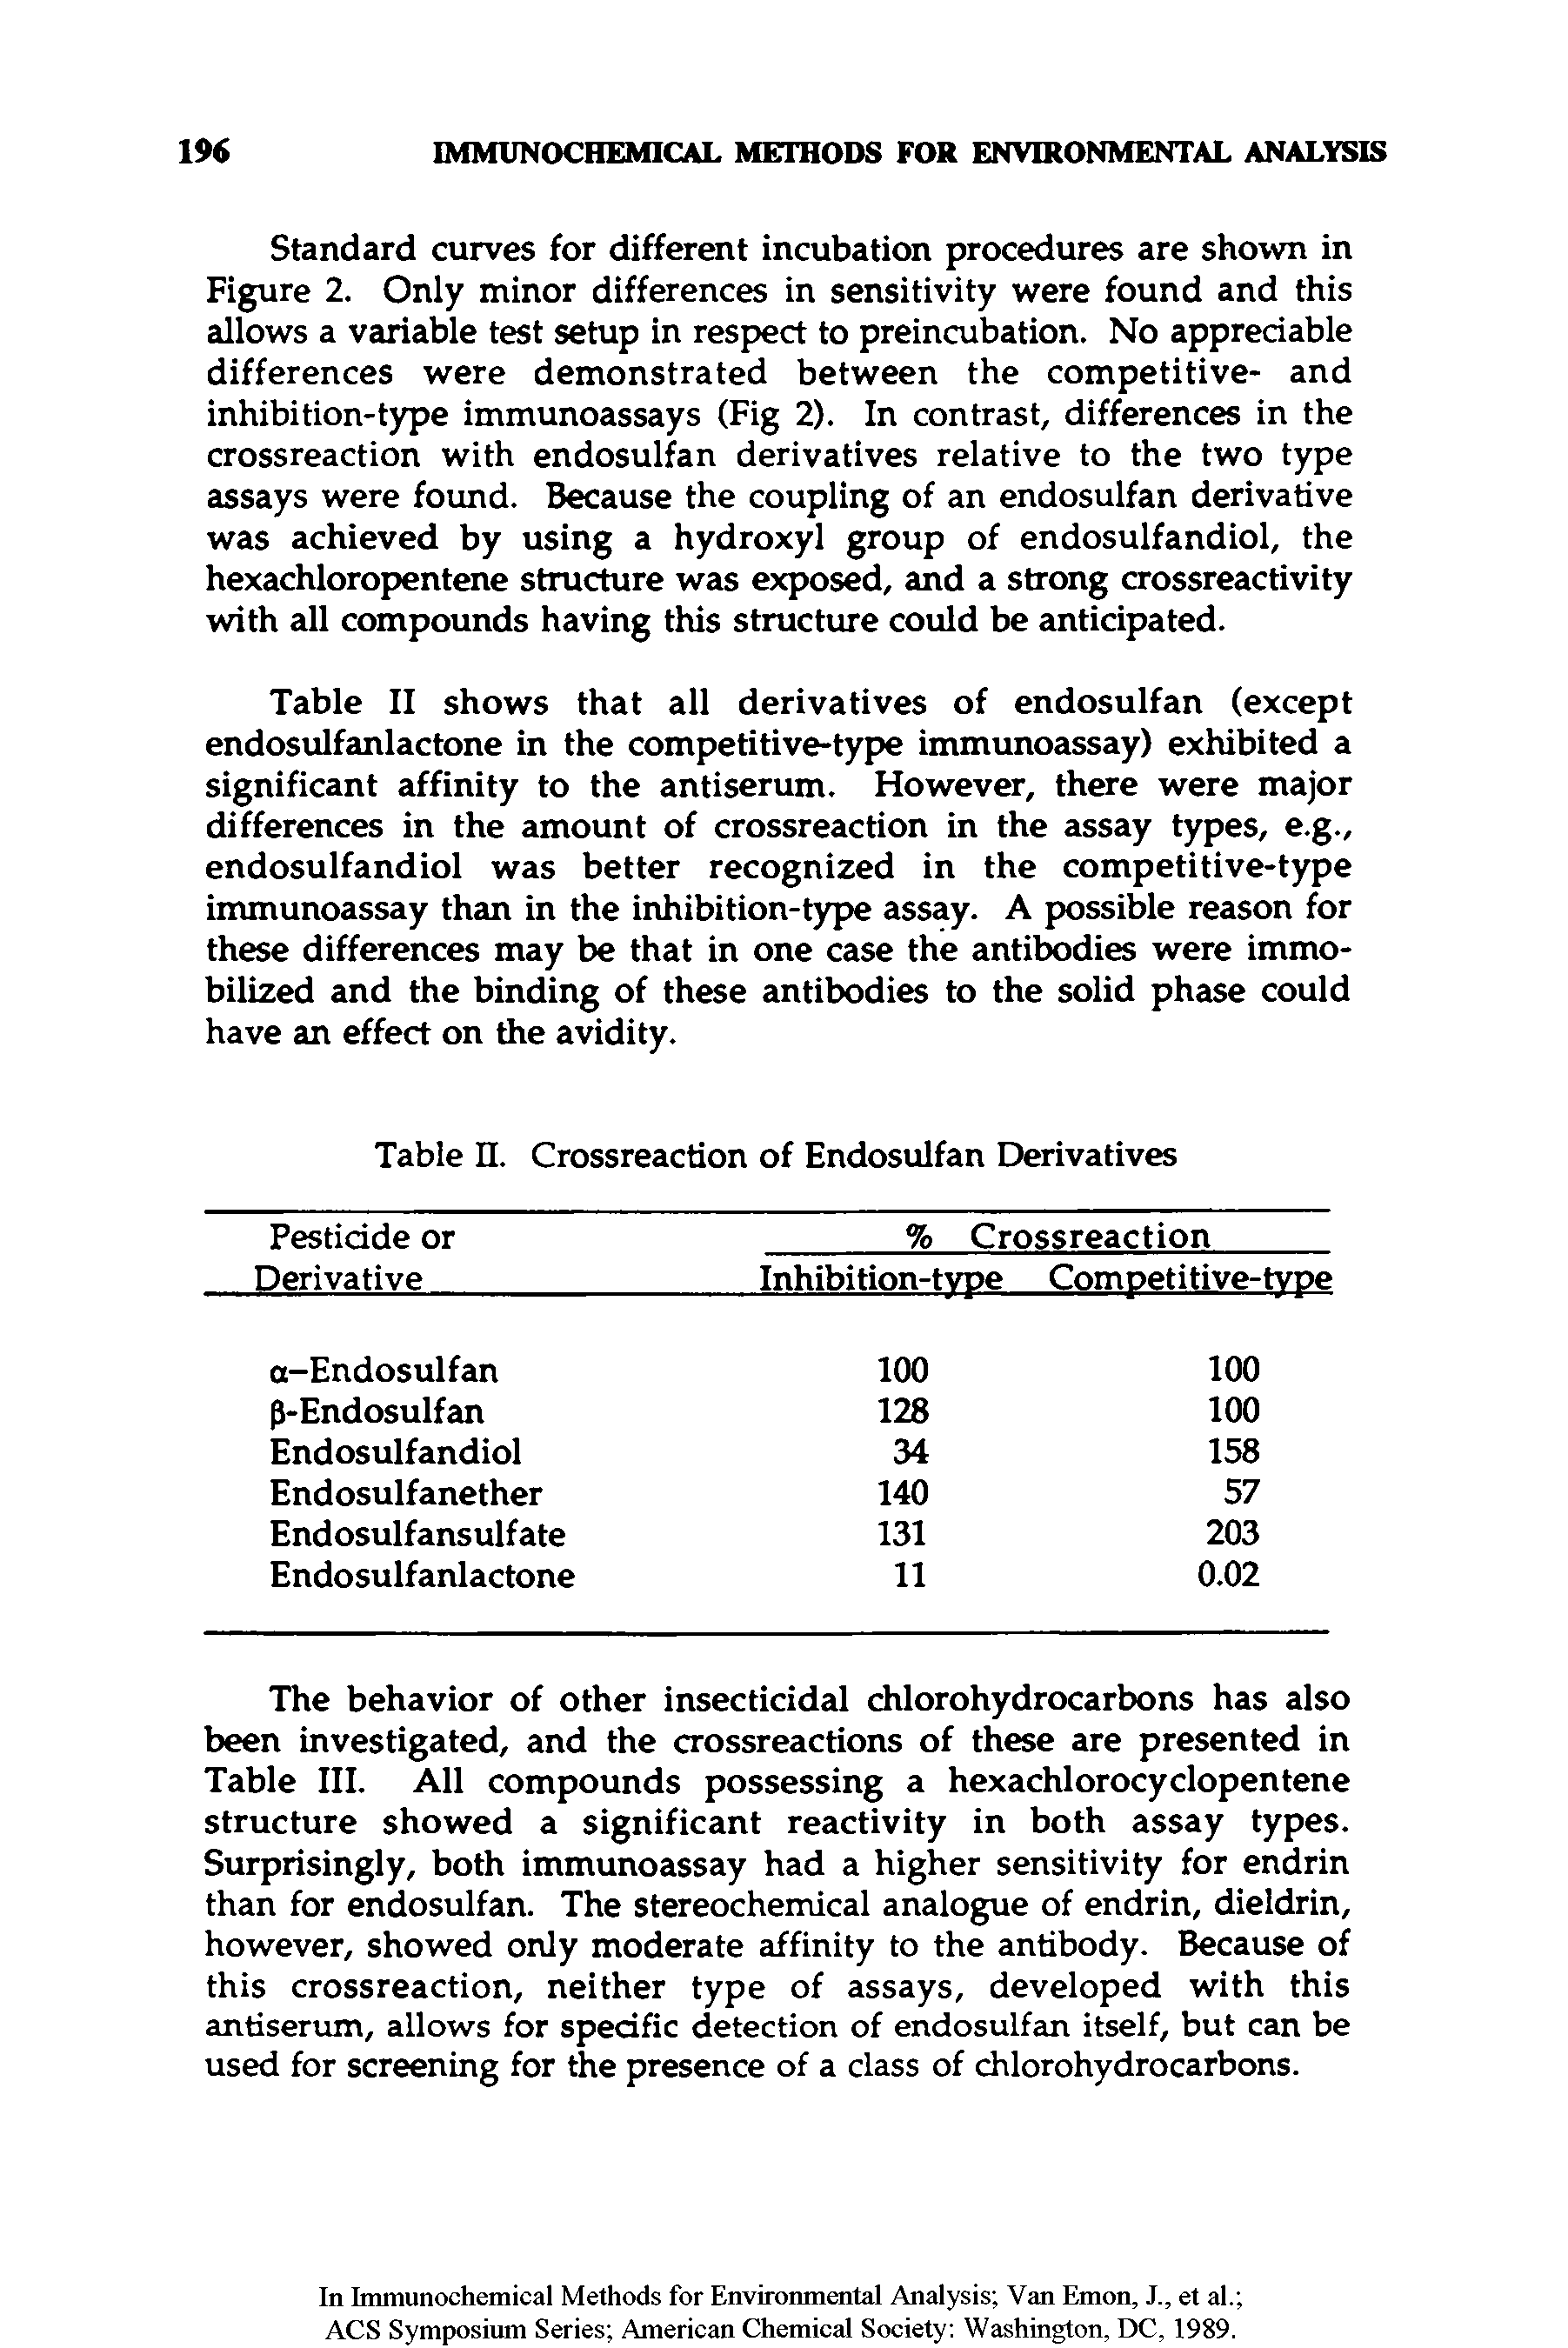 Table II shows that all derivatives of endosulfan (except endosulfanlactone in the competitive-type immunoassay) exhibited a significant affinity to the antiserum. However, there were major differences in the amount of crossreaction in the assay types, e.g., endosulfandiol was better recognized in the competitive-type immunoassay than in the inhibition-type assay. A possible reason for these differences may be that in one case the antibodies were immobilized and the binding of these antibodies to the solid phase could have an effect on the avidity.